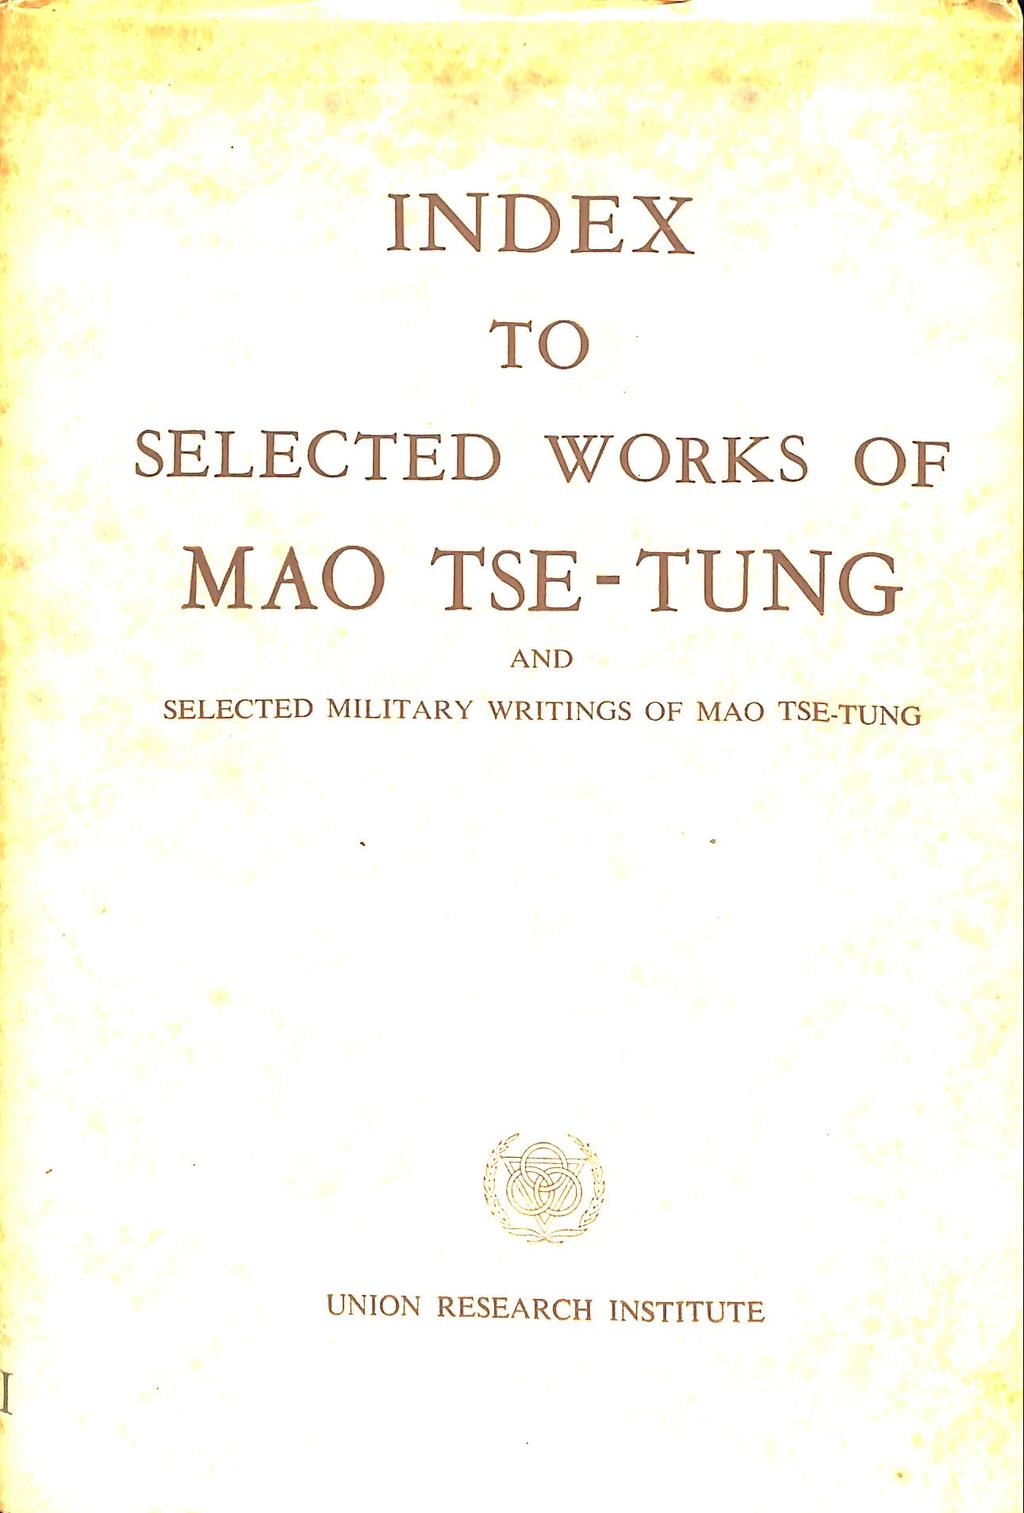 f i, \ * INDEX TO SELECTED WORKS OF MAO TSE-TUNG AND